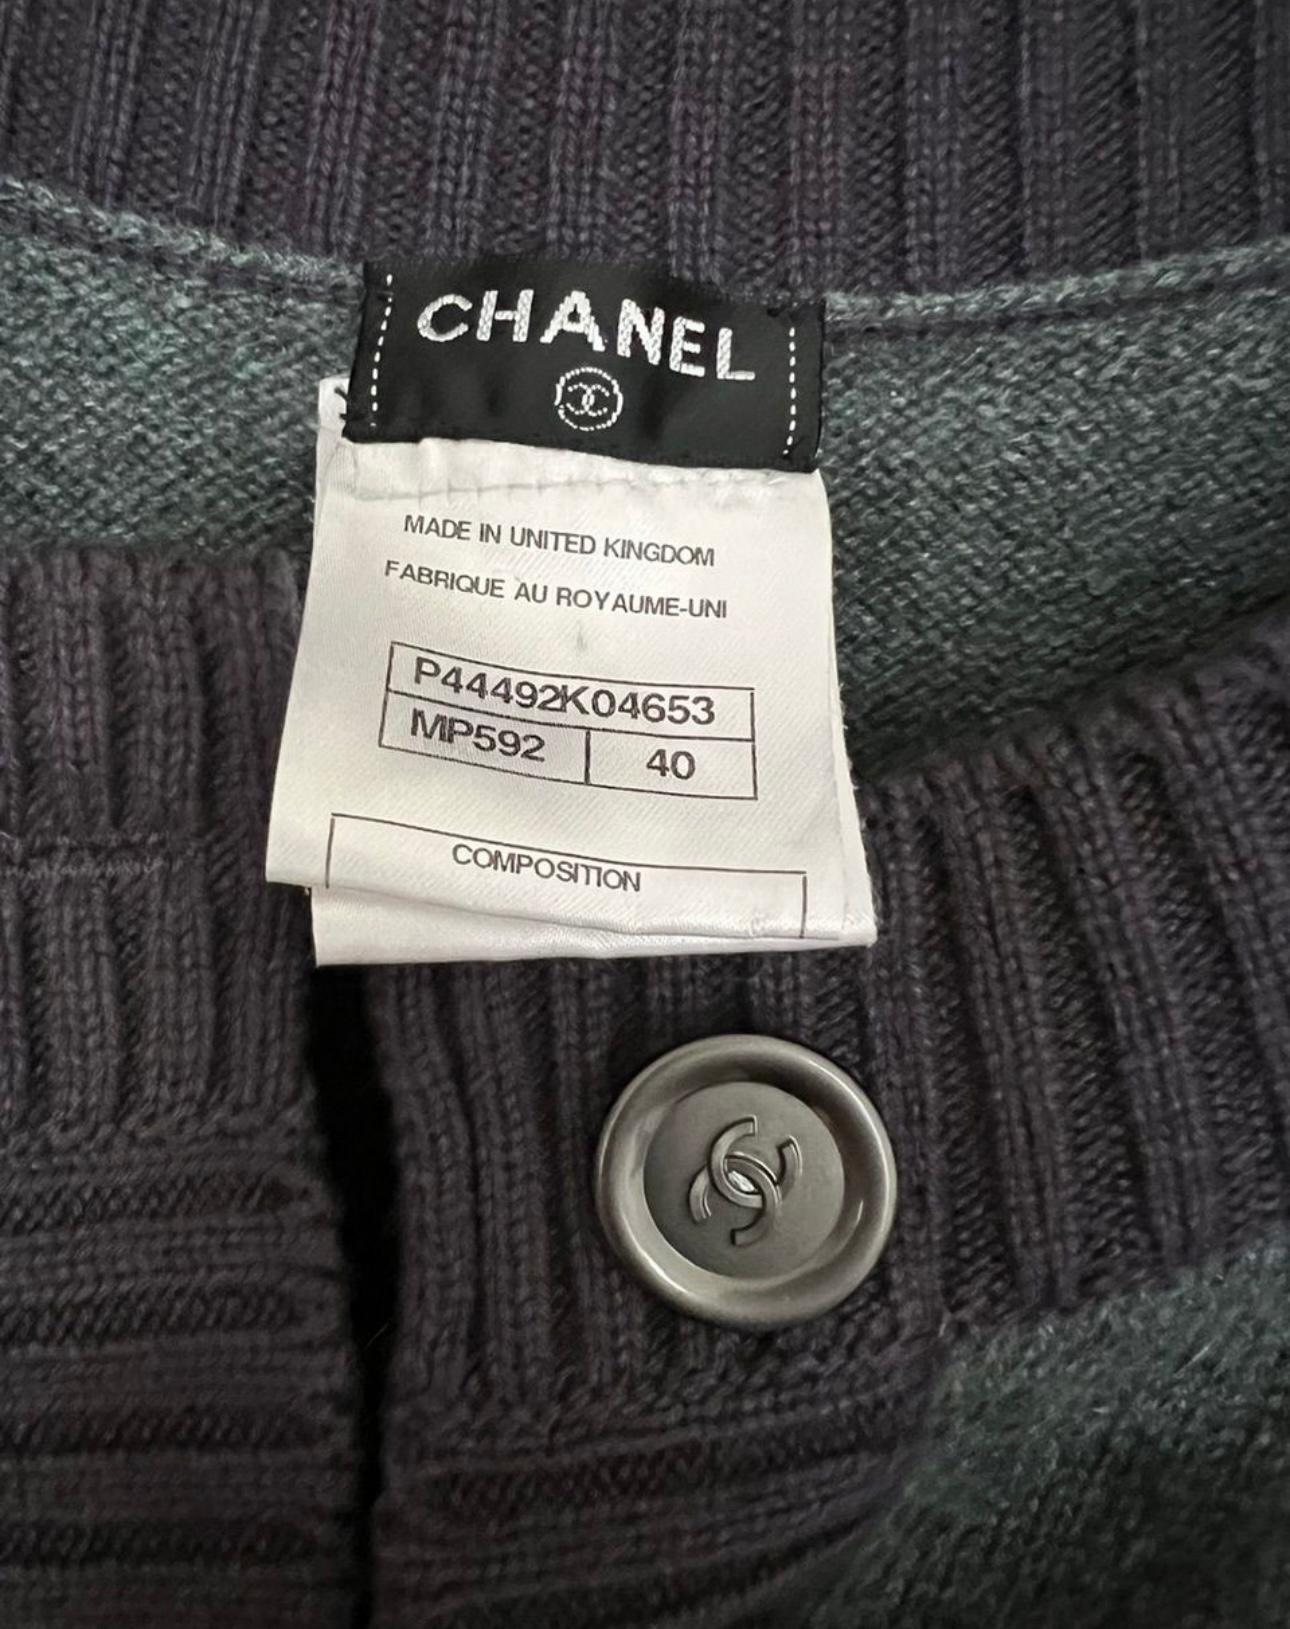 New Chanel cashmere cardi coat with CC logo buttons.
Size mark 40 FR.